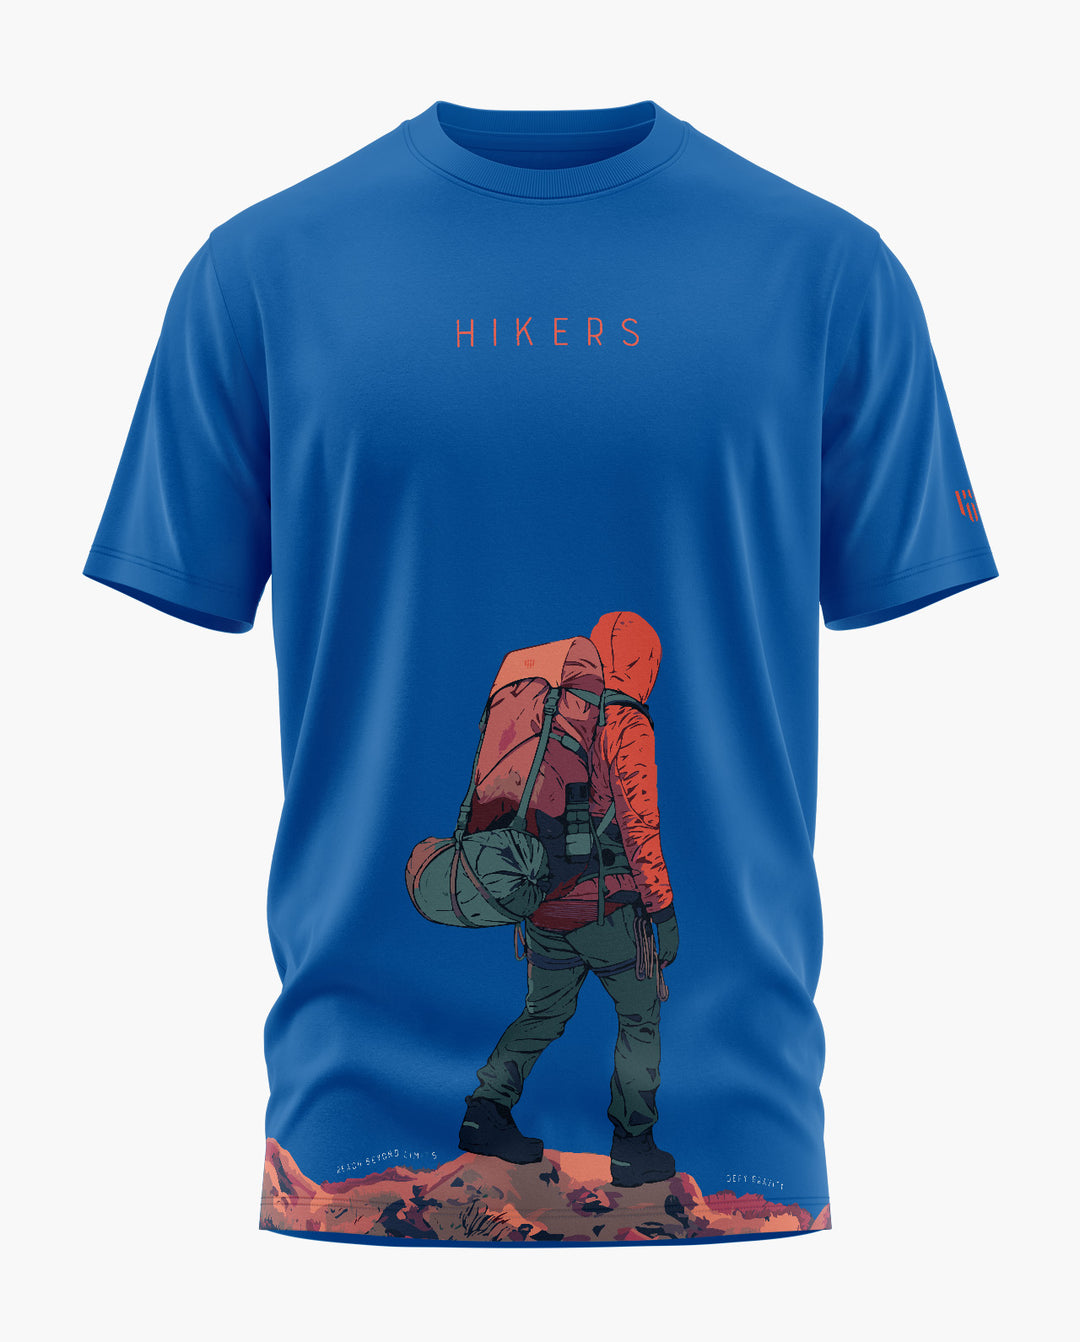 HIKERS T-Shirt